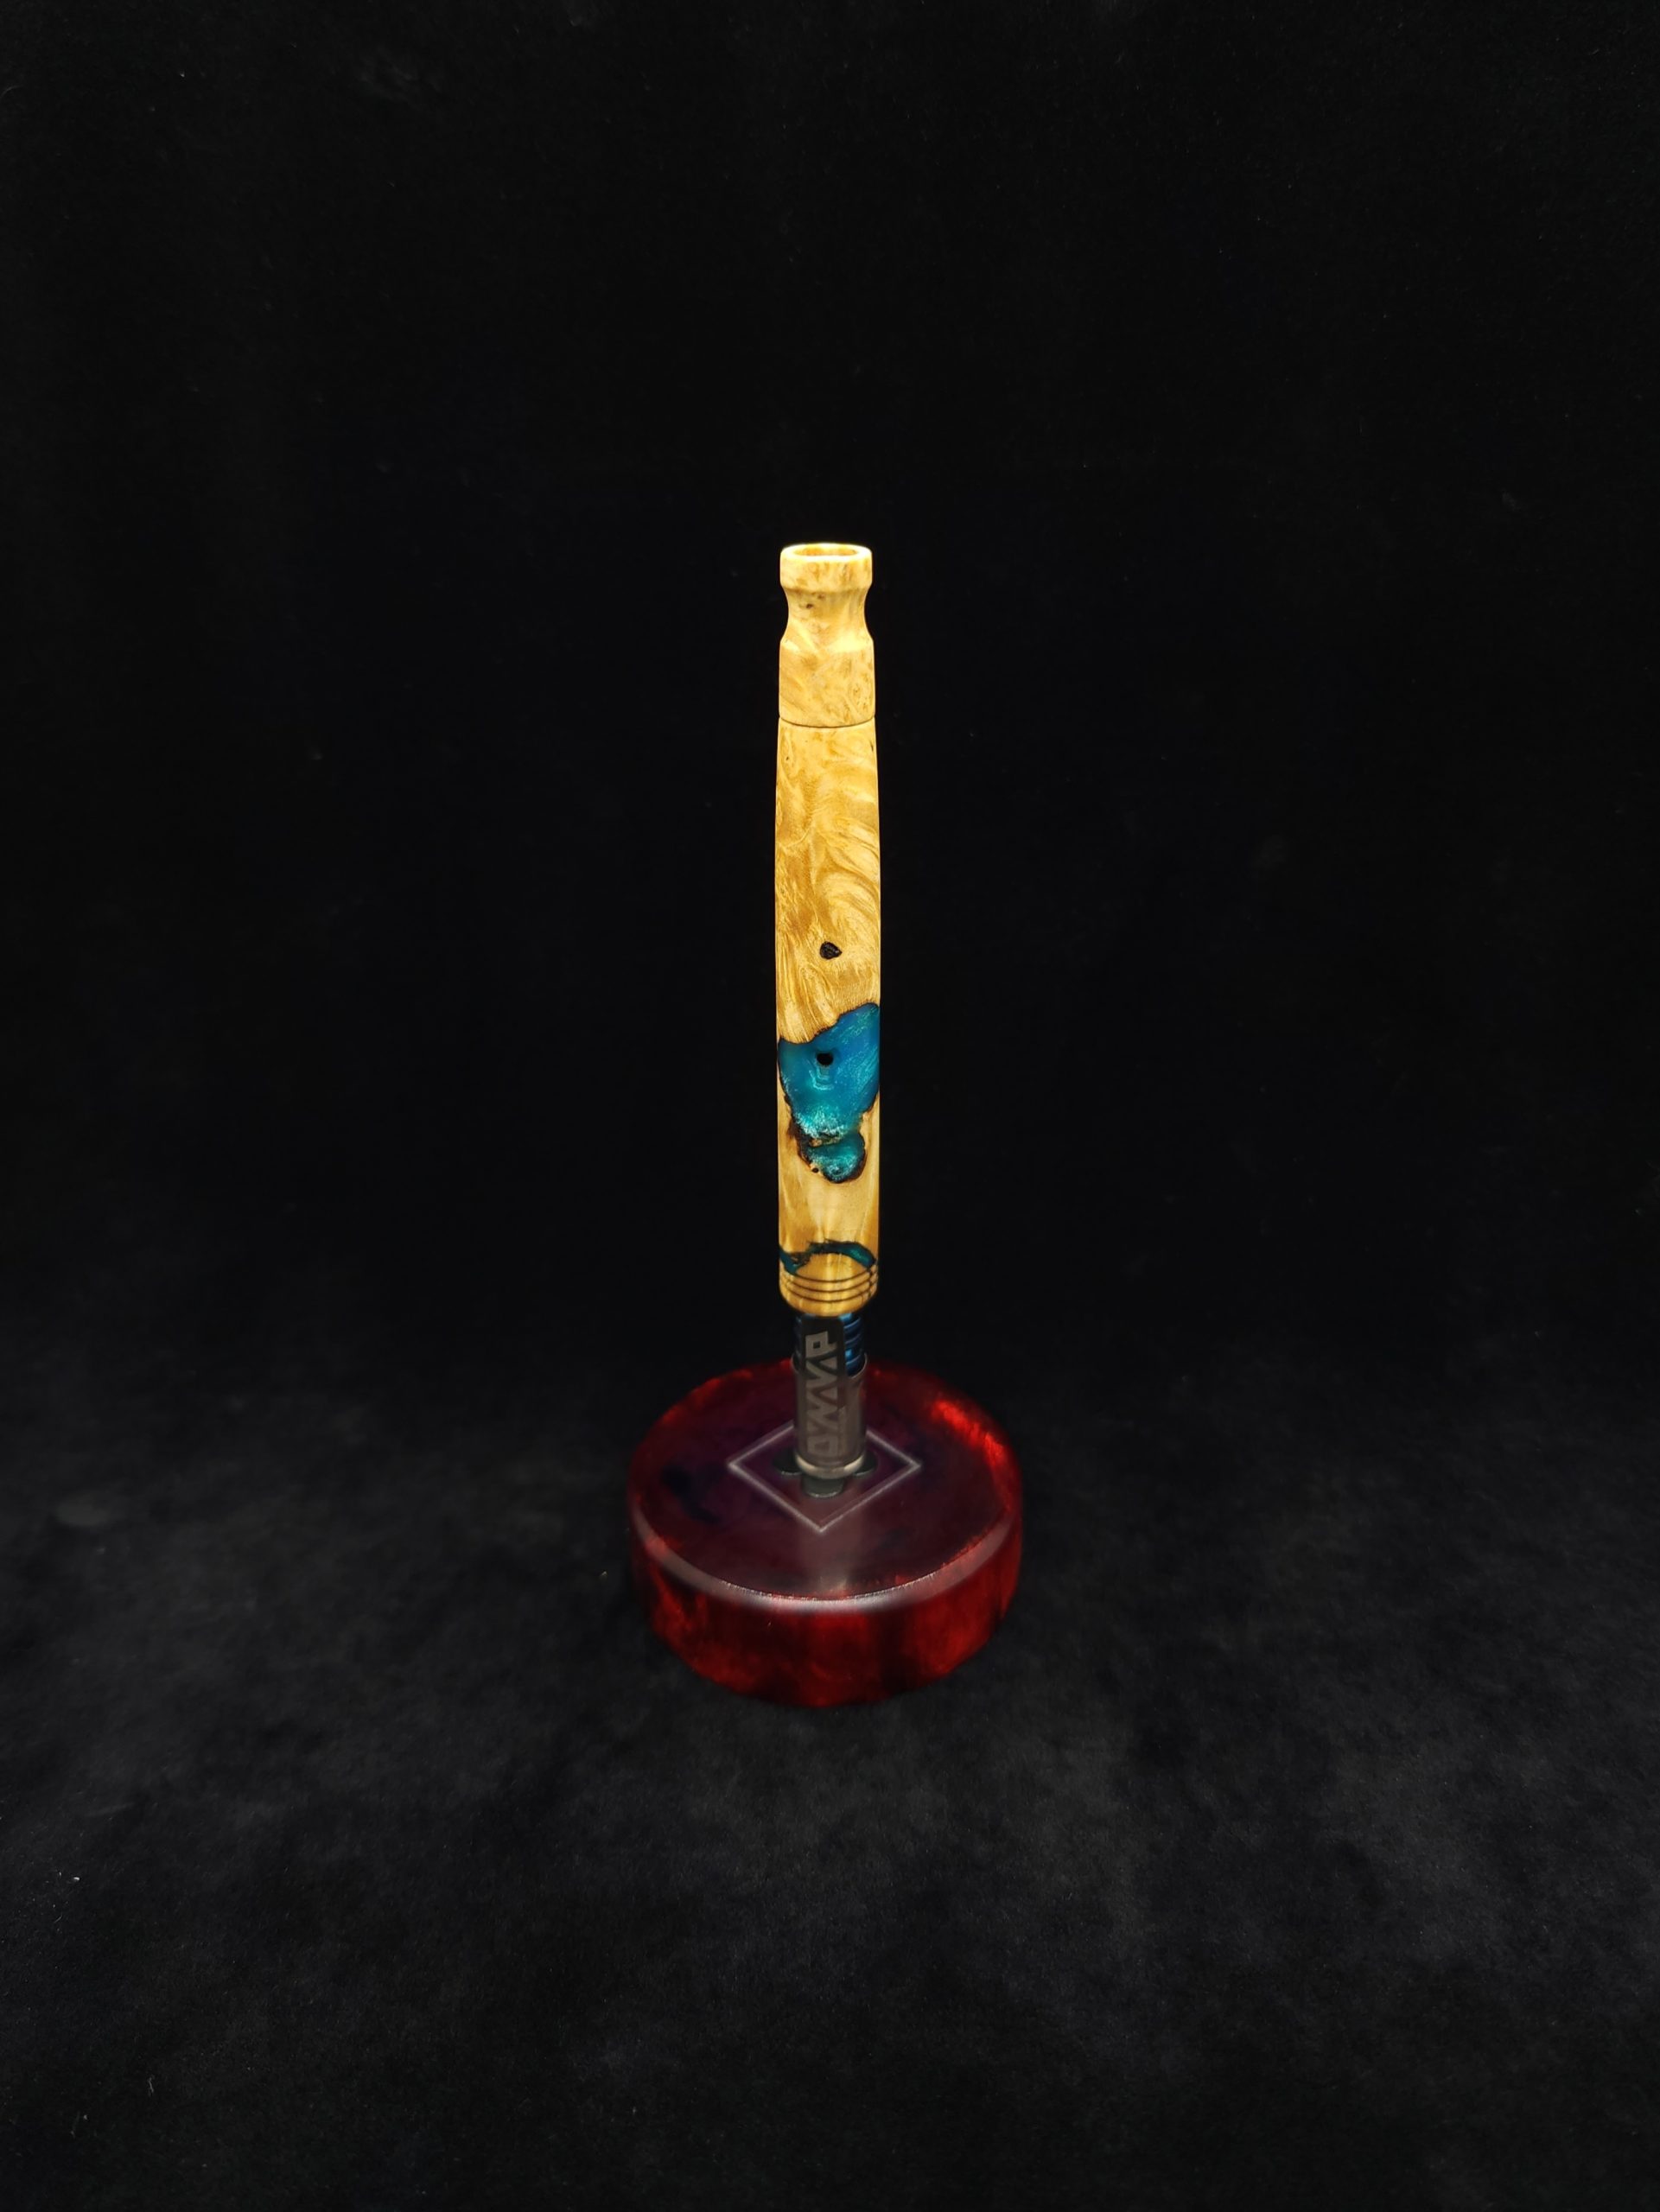 This image portrays Burl Hybrid XL-Straight Taper(Slim Style)Dynavap Stem + Mouthpiece by Dovetail Woodwork.